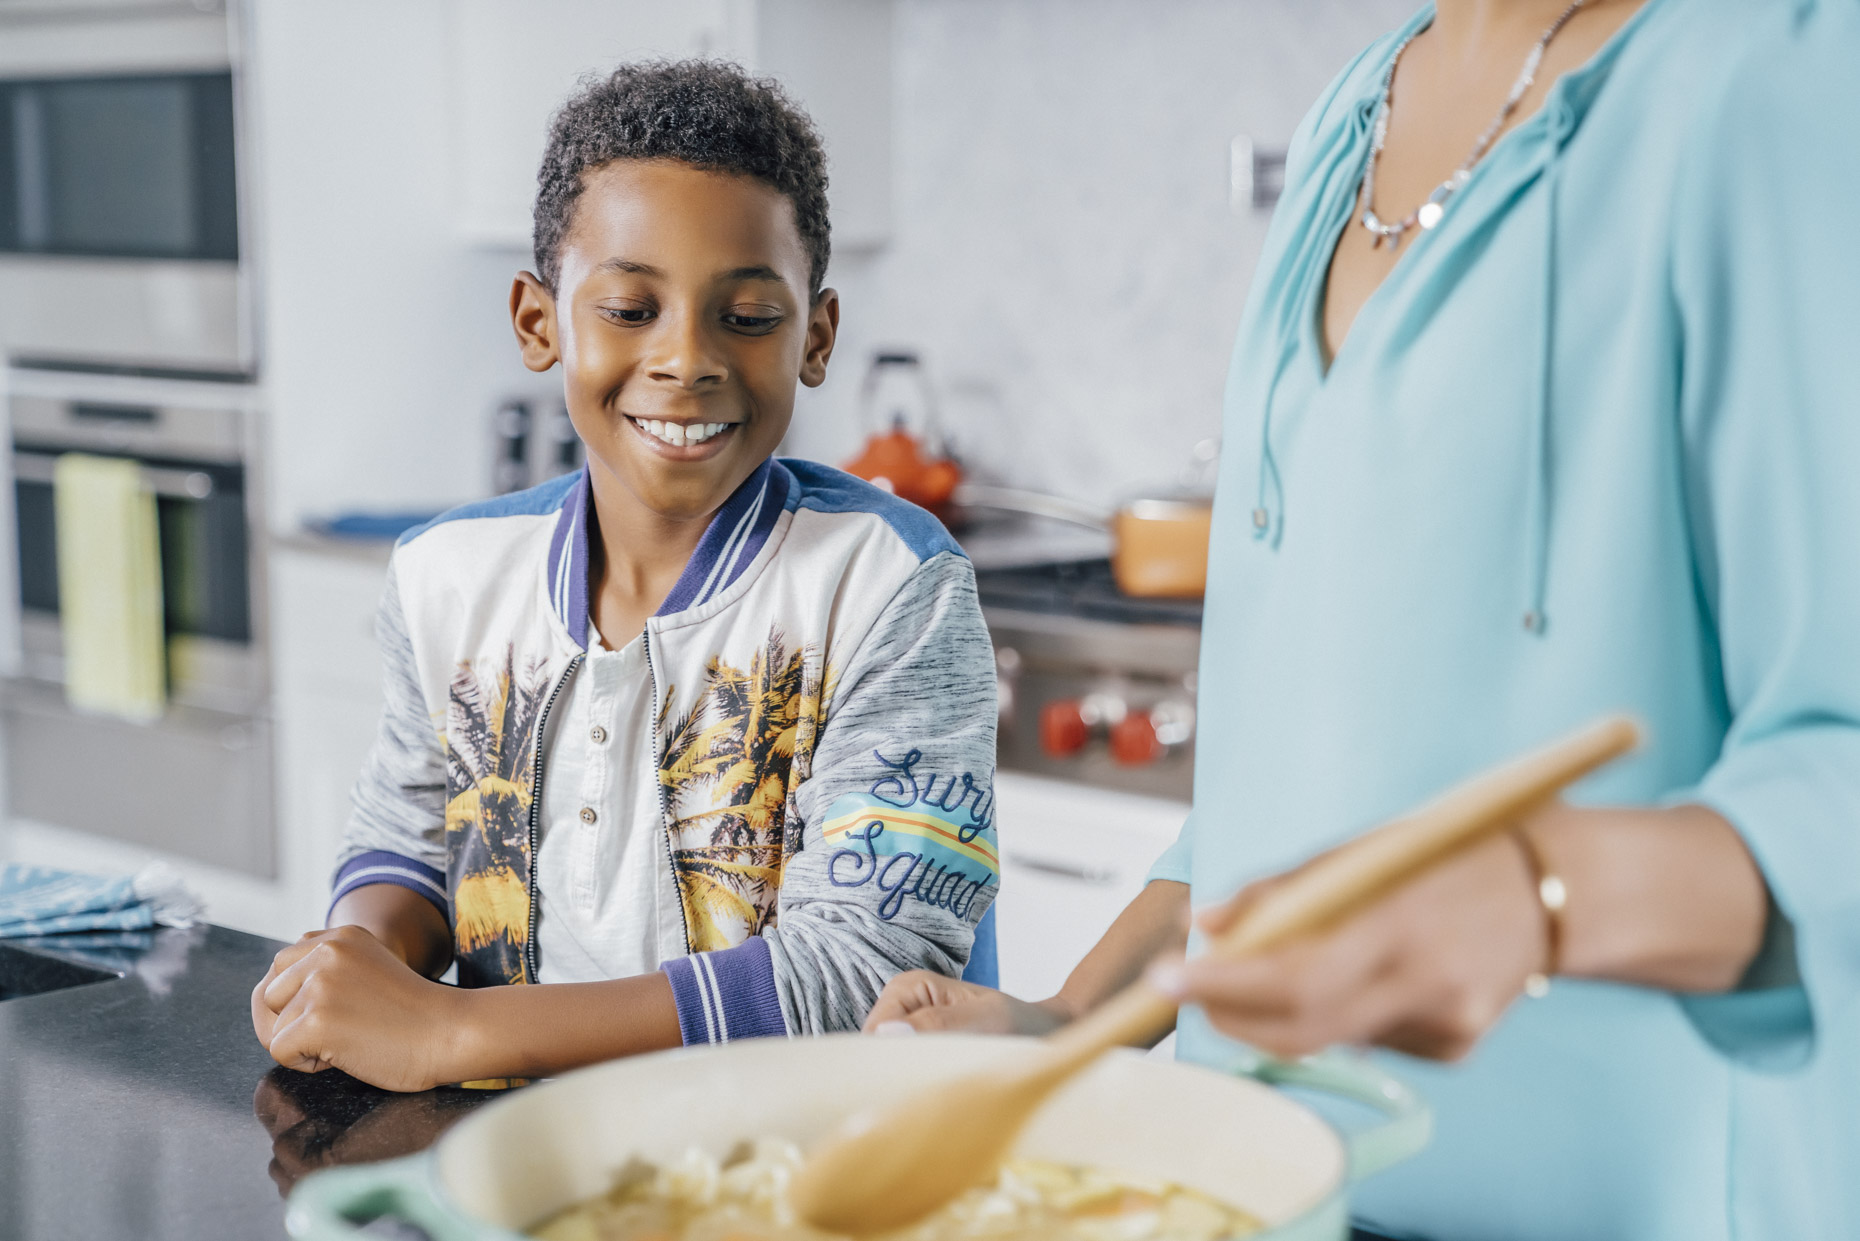 Boy looking excitedly at pot of food mom is making